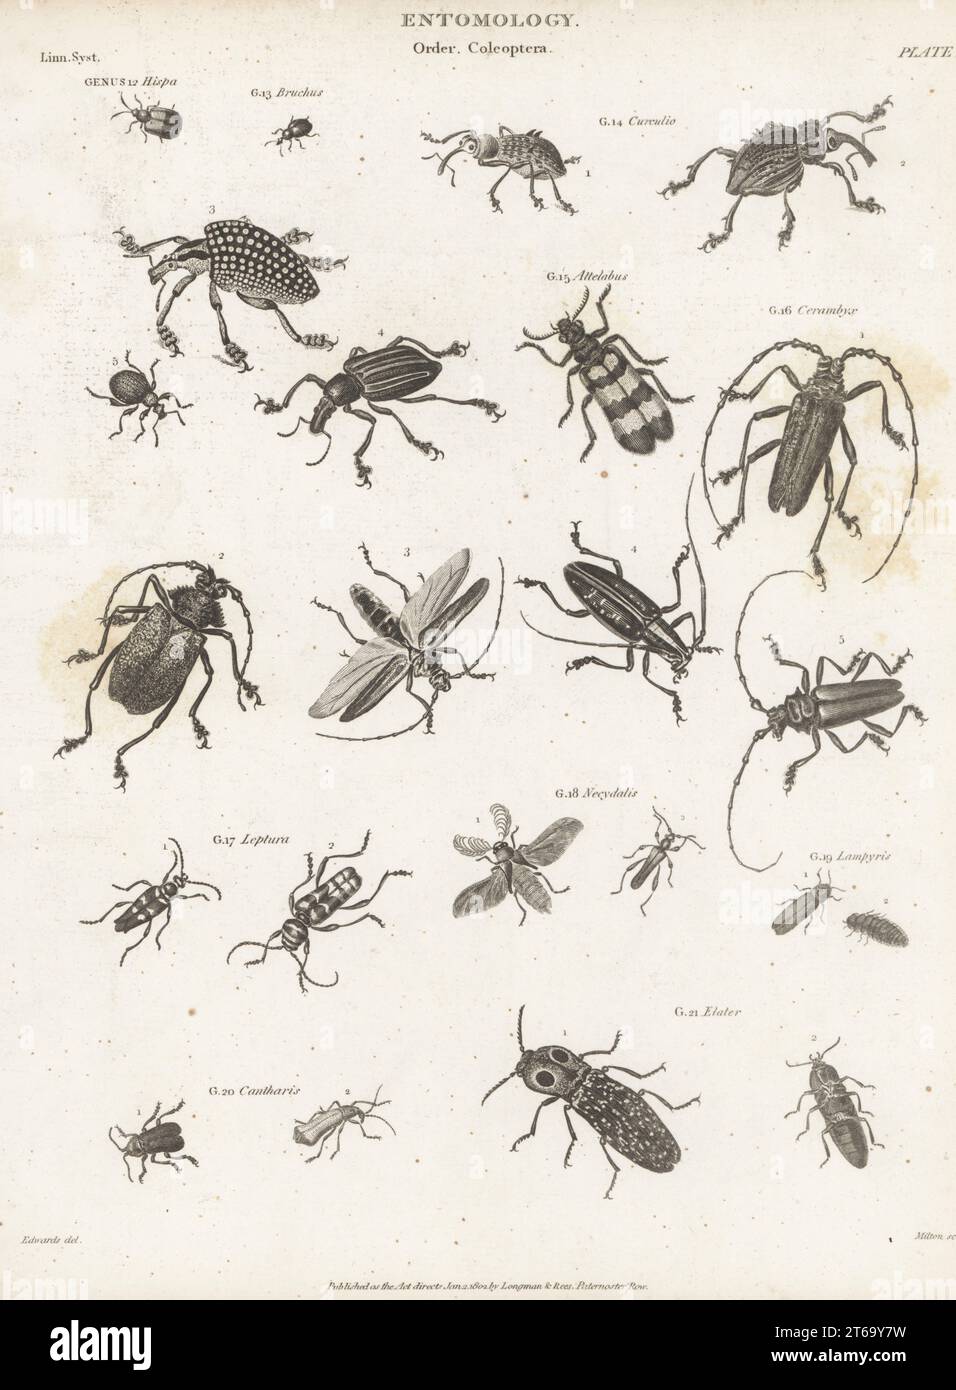 Genera of Coleoptera beetles: Hispa 12 and Bruchus leaf beetles 13, Curculio 14 and Attelabus weevils 15, Cerambyx 16, Leptura 17 and Necydalis capricorn beetles 18, Lampyris glowworm 19, Cantharis soldier beetles 20, and Elater click beetle 21. Copperplate engraving by Thomas Milton after Sydenham Edwards from Abraham Rees' Cyclopedia or Universal Dictionary of Arts, Sciences and Literature, Longman, Rees, Paternoster Row, London, January 2, 1802. Stock Photo